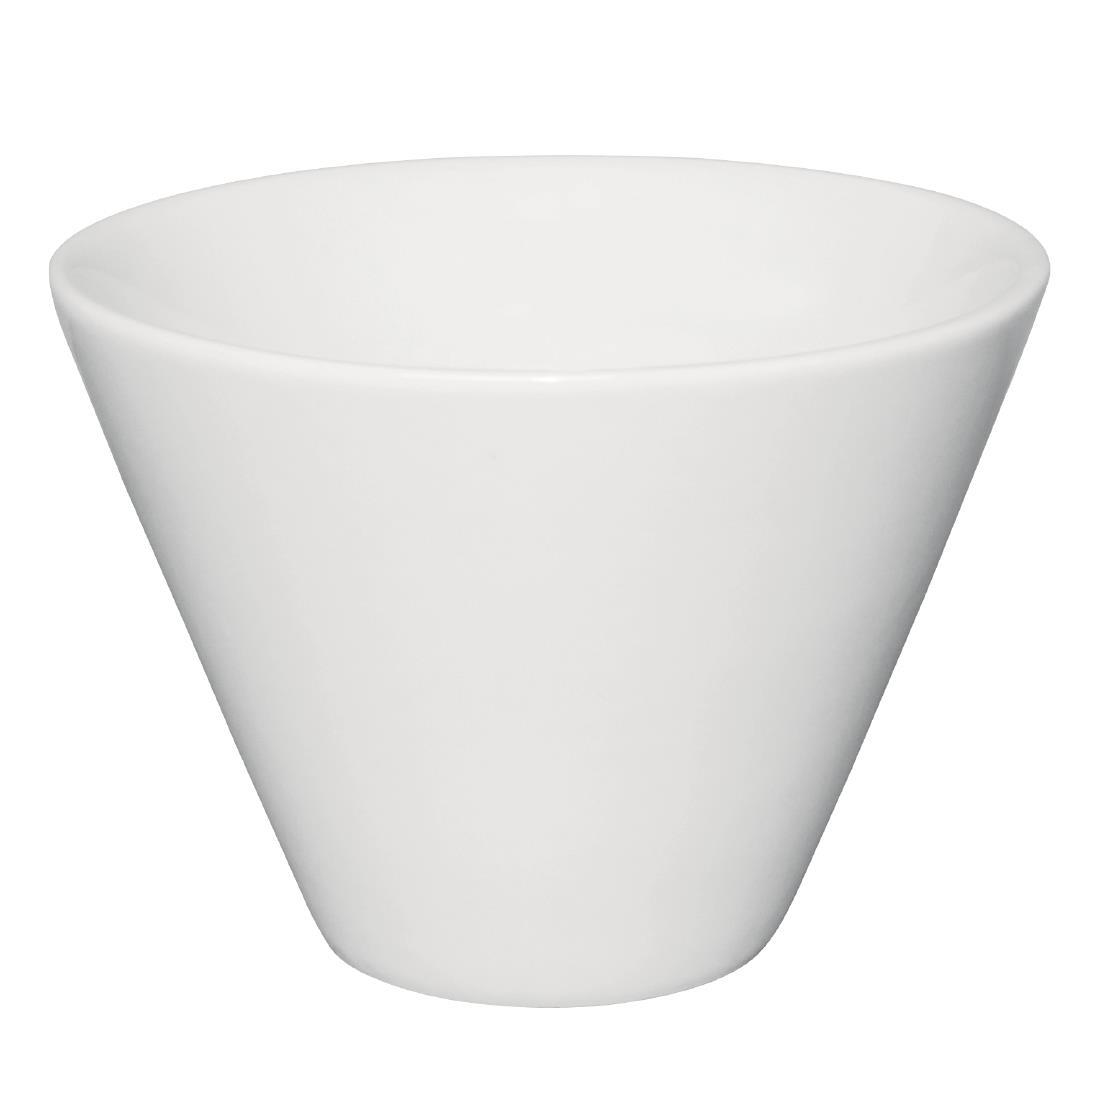 Olympia Conical Ramekin White 110mm (Pack of 6) - CM165  - 2